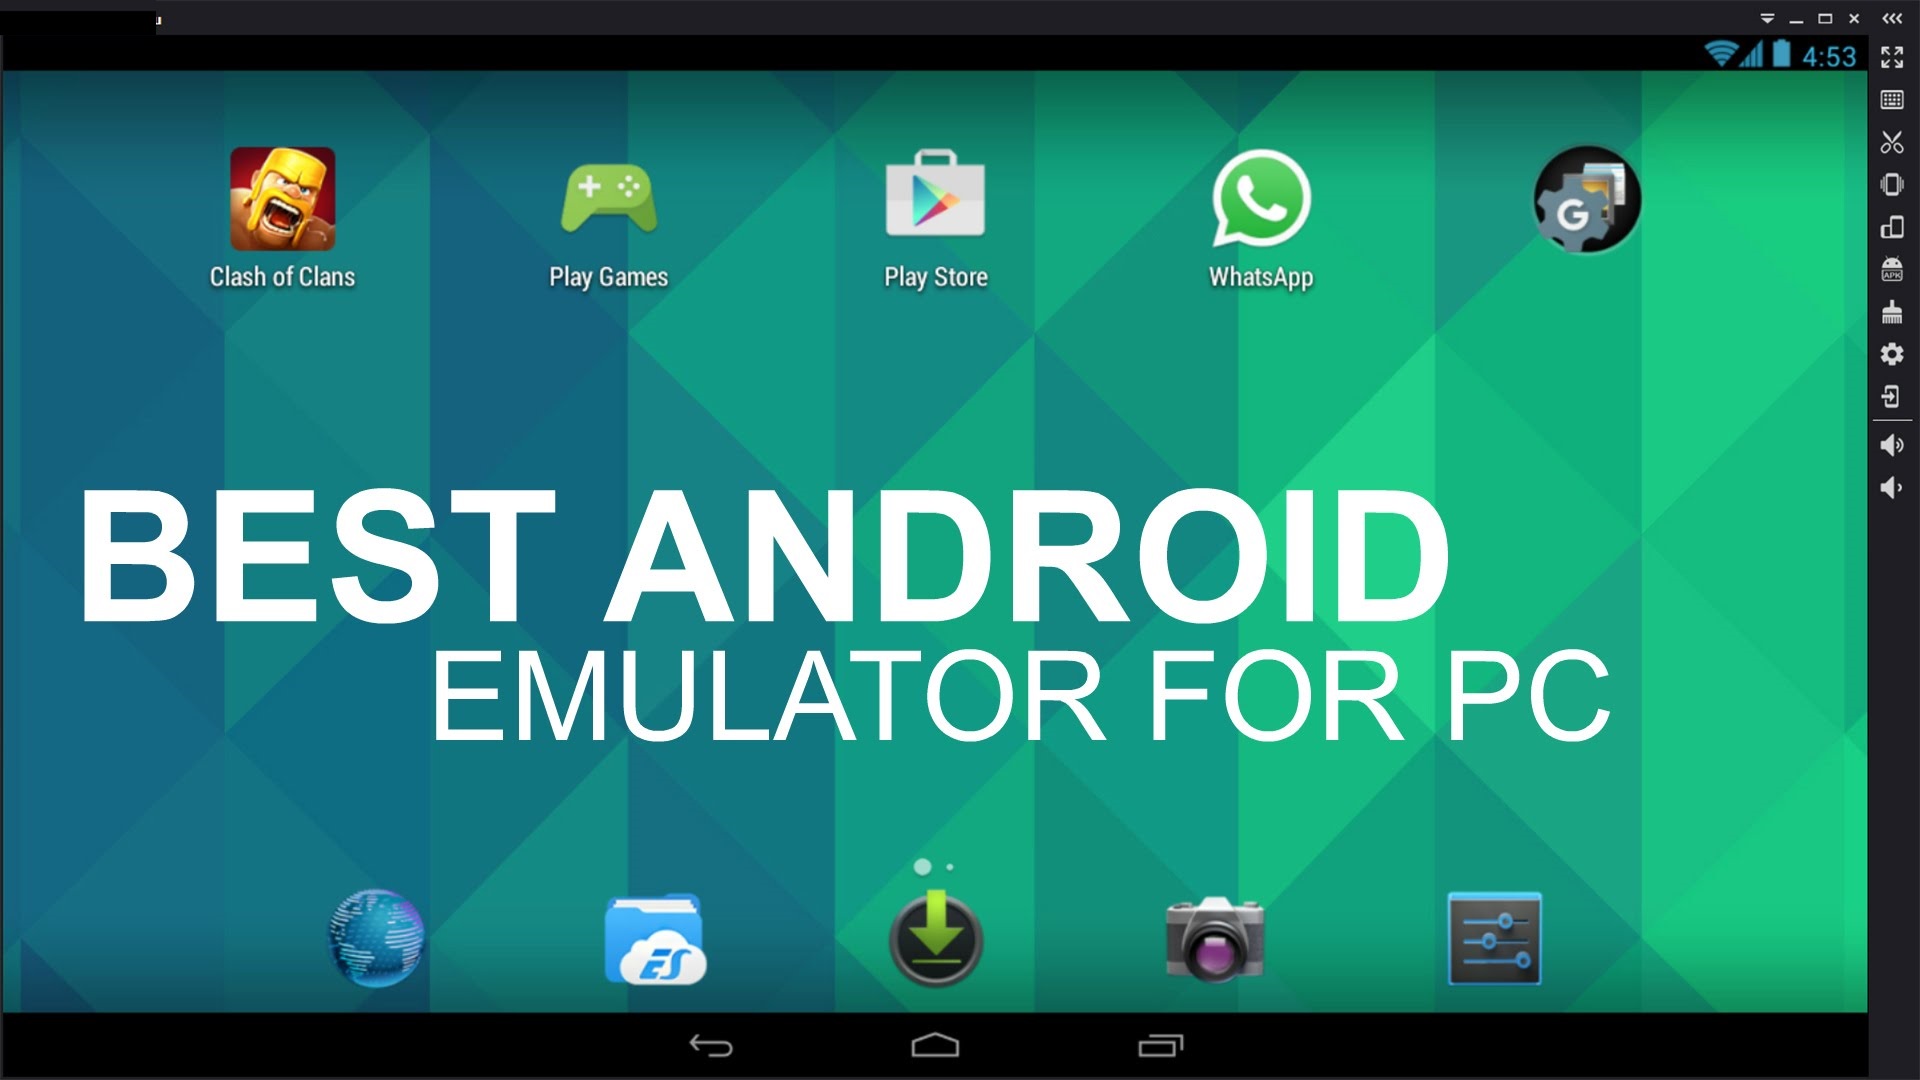 Download Genymotion Android Emulator For Windows 7